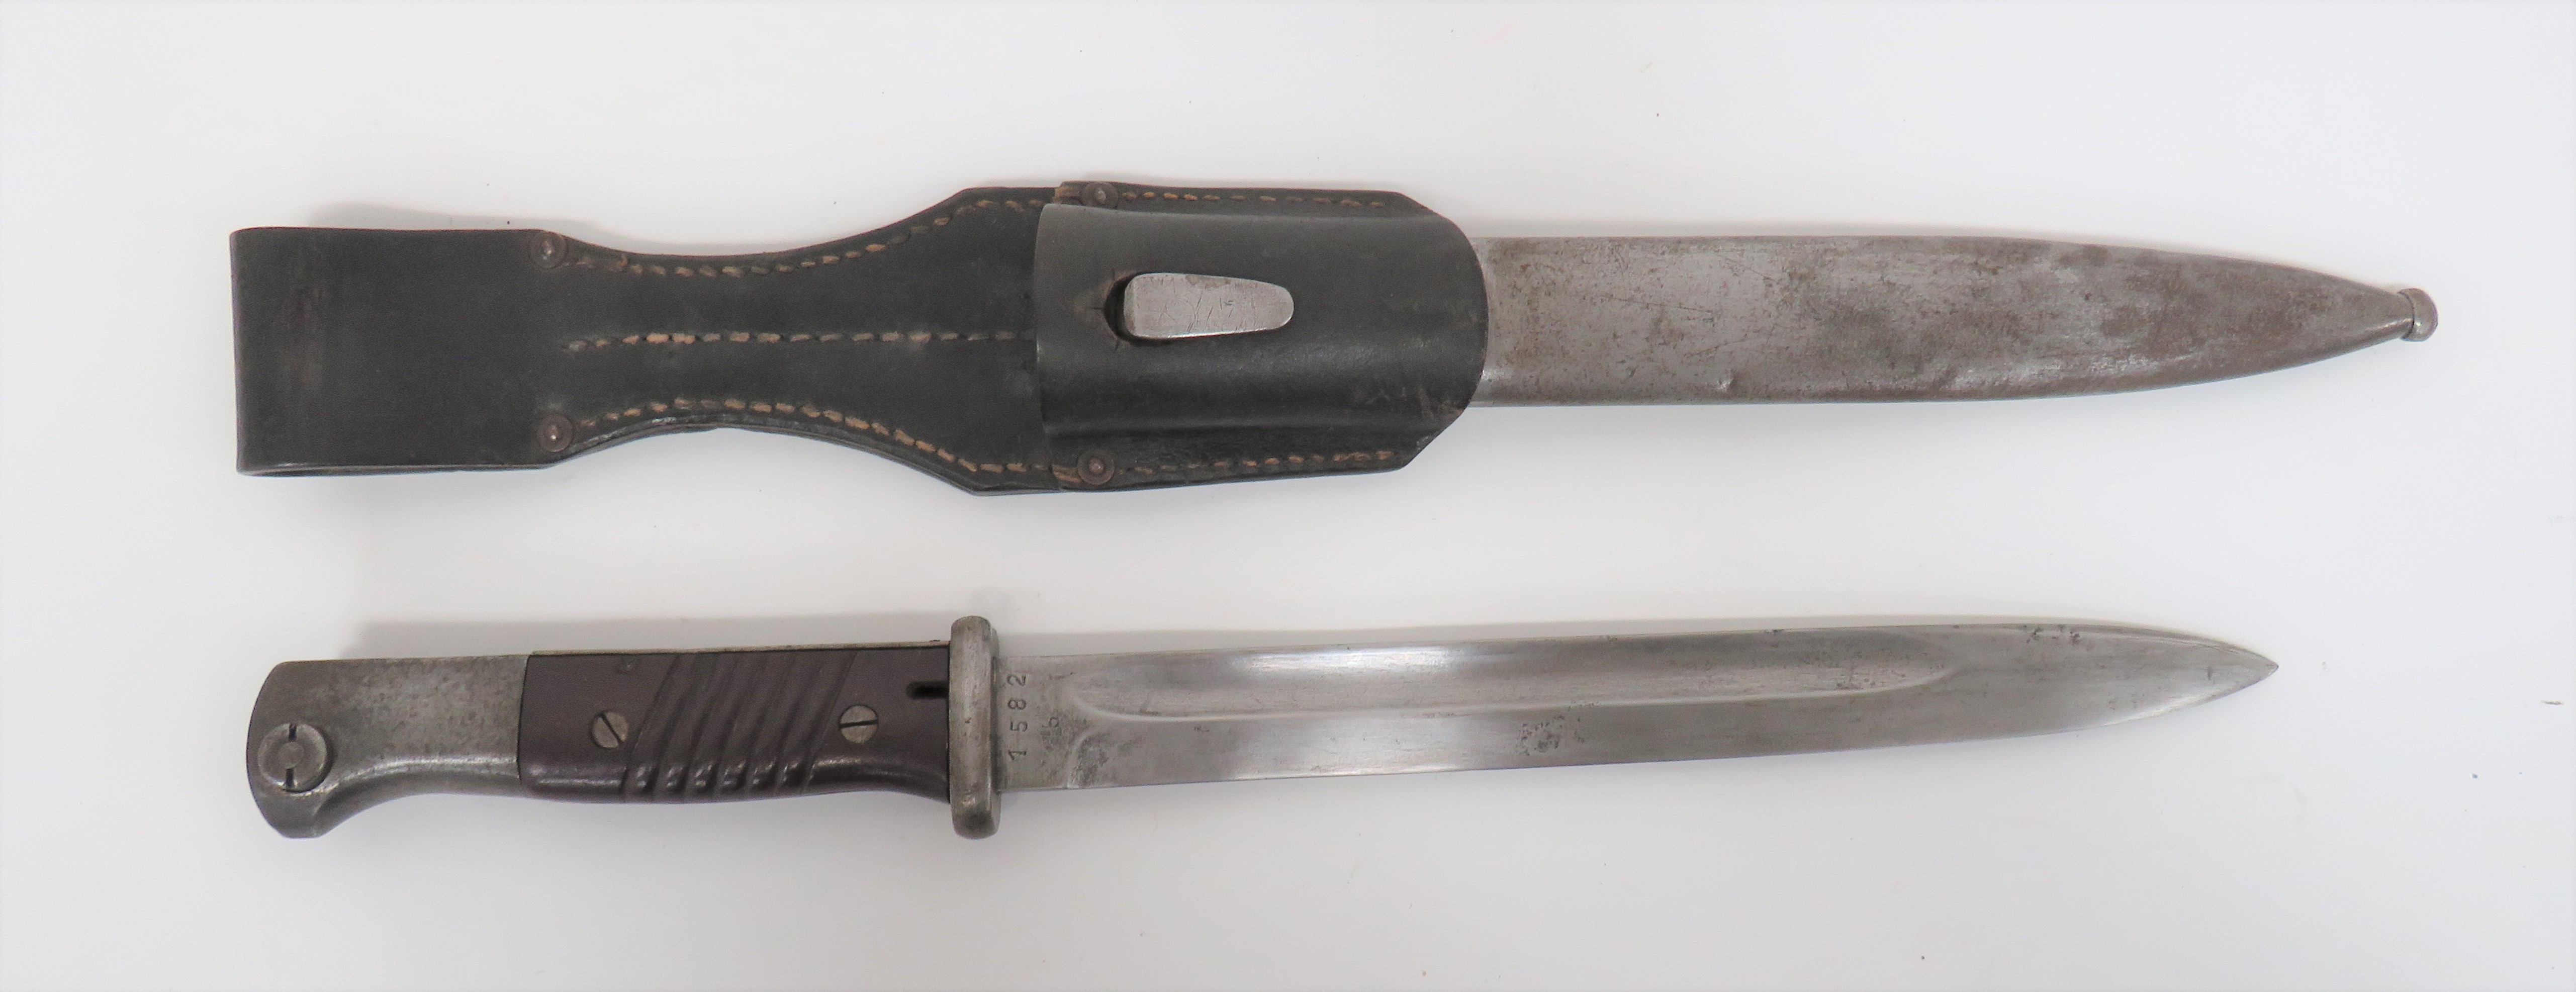 WW2 German K98 Mauser Bayonet 9 3/4 inch, single edged blade with wide fuller.  Forte marked "